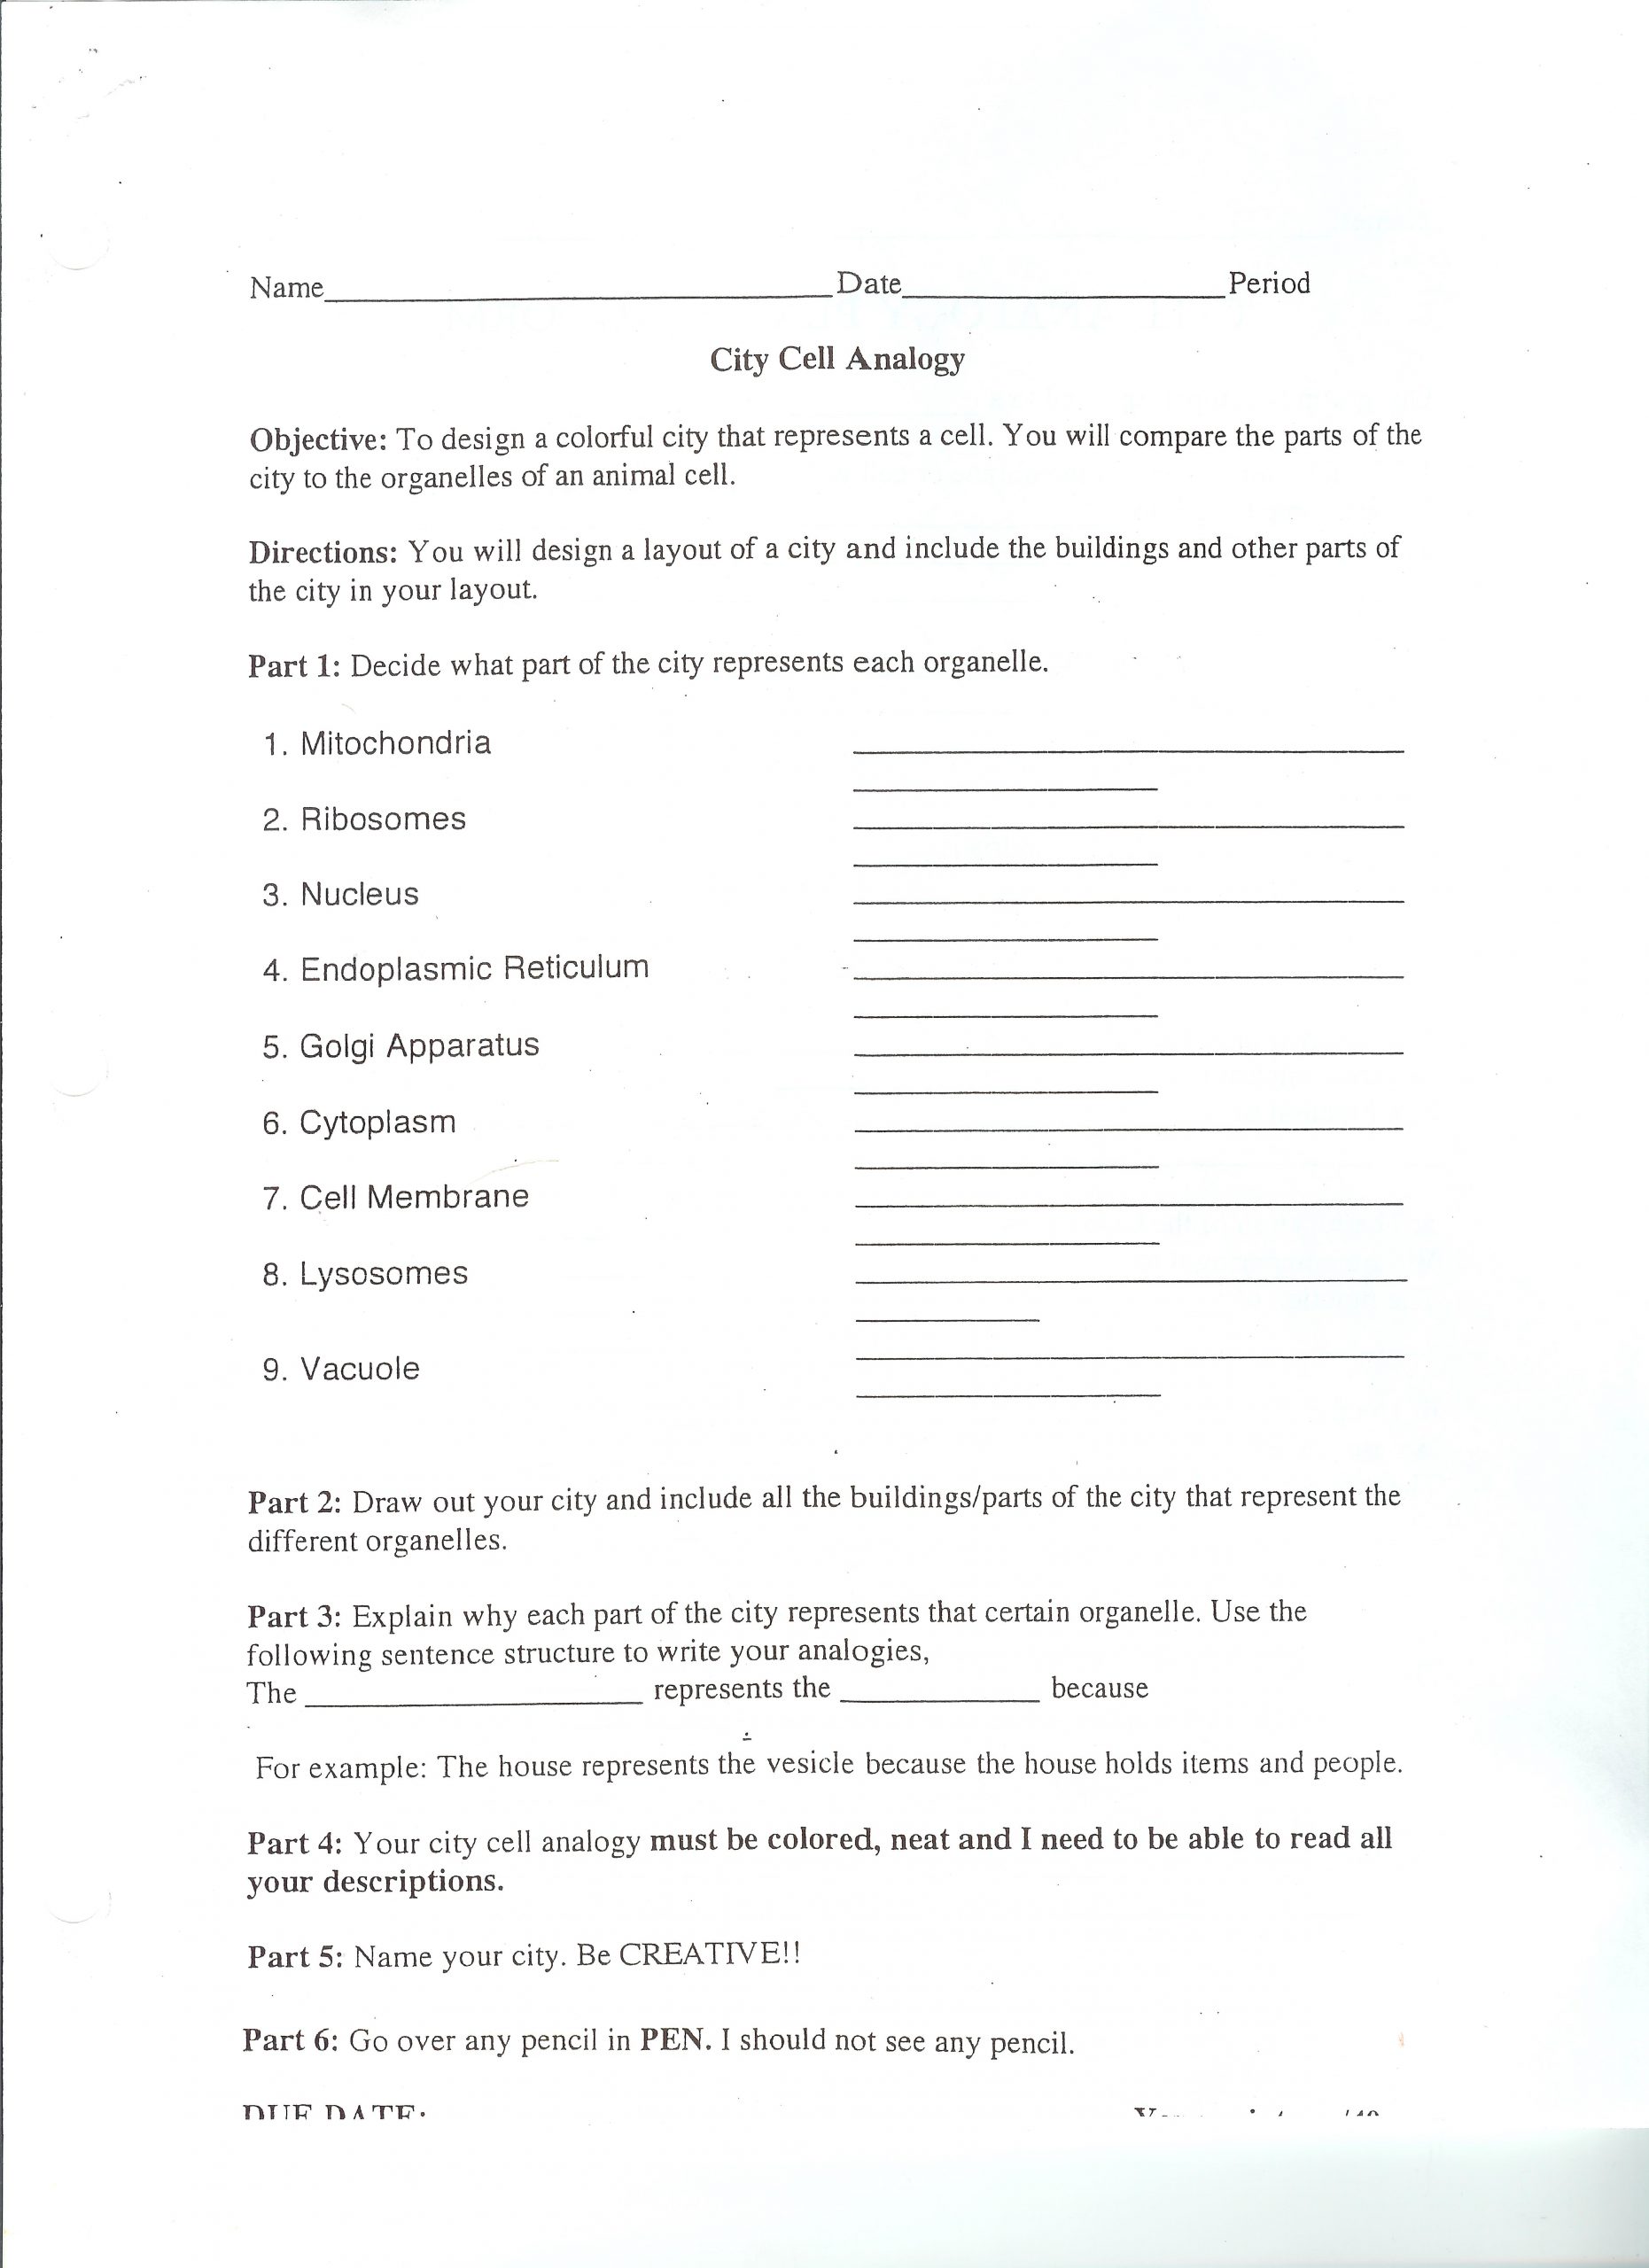 Cell City Analogy Worksheet Doctor Science Home Page